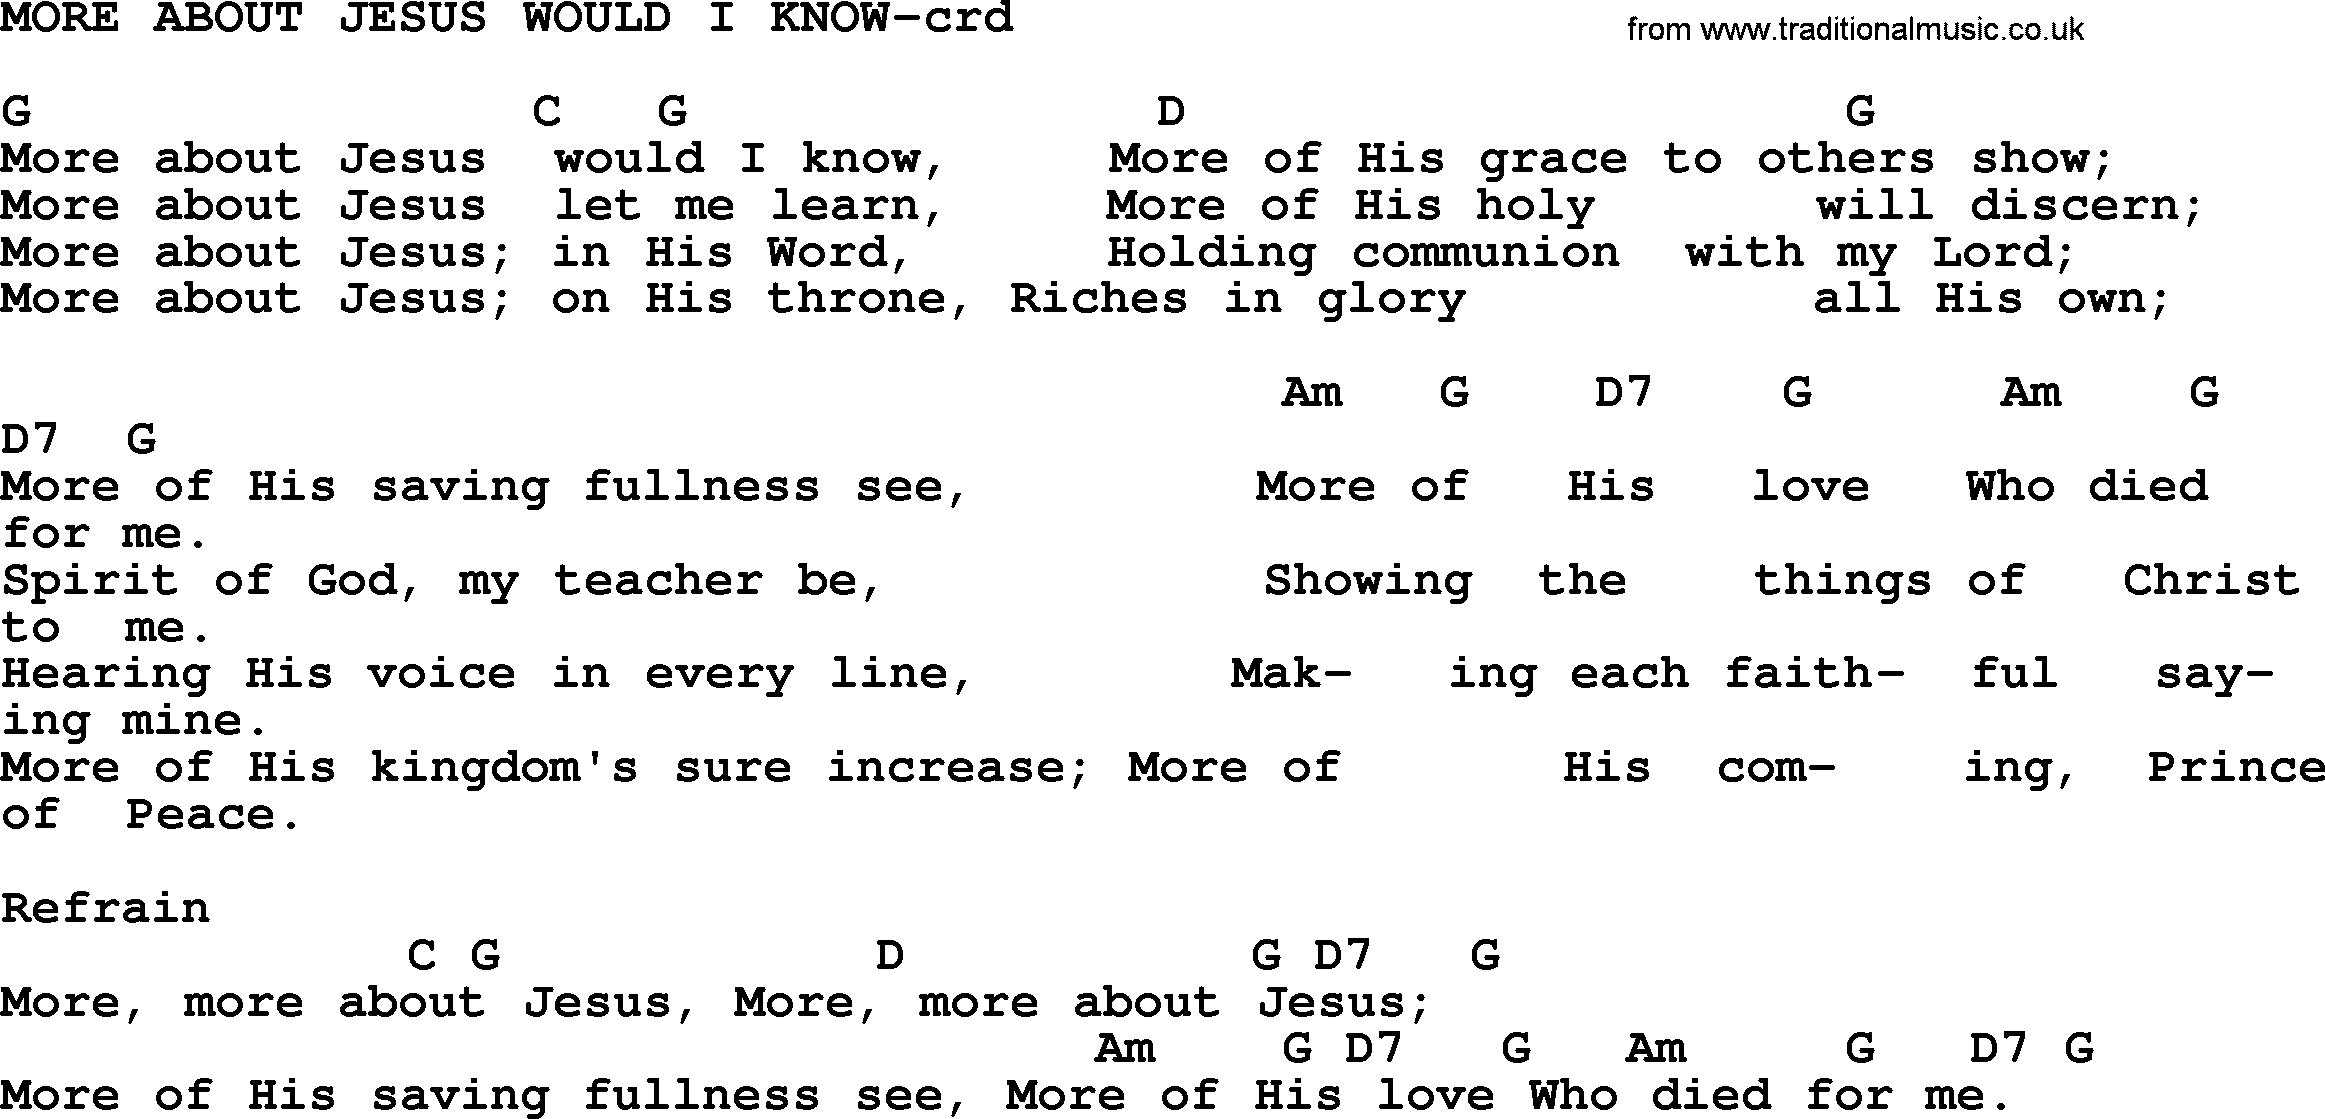 Top 500 Hymn: More About Jesus Would I Know, lyrics and chords